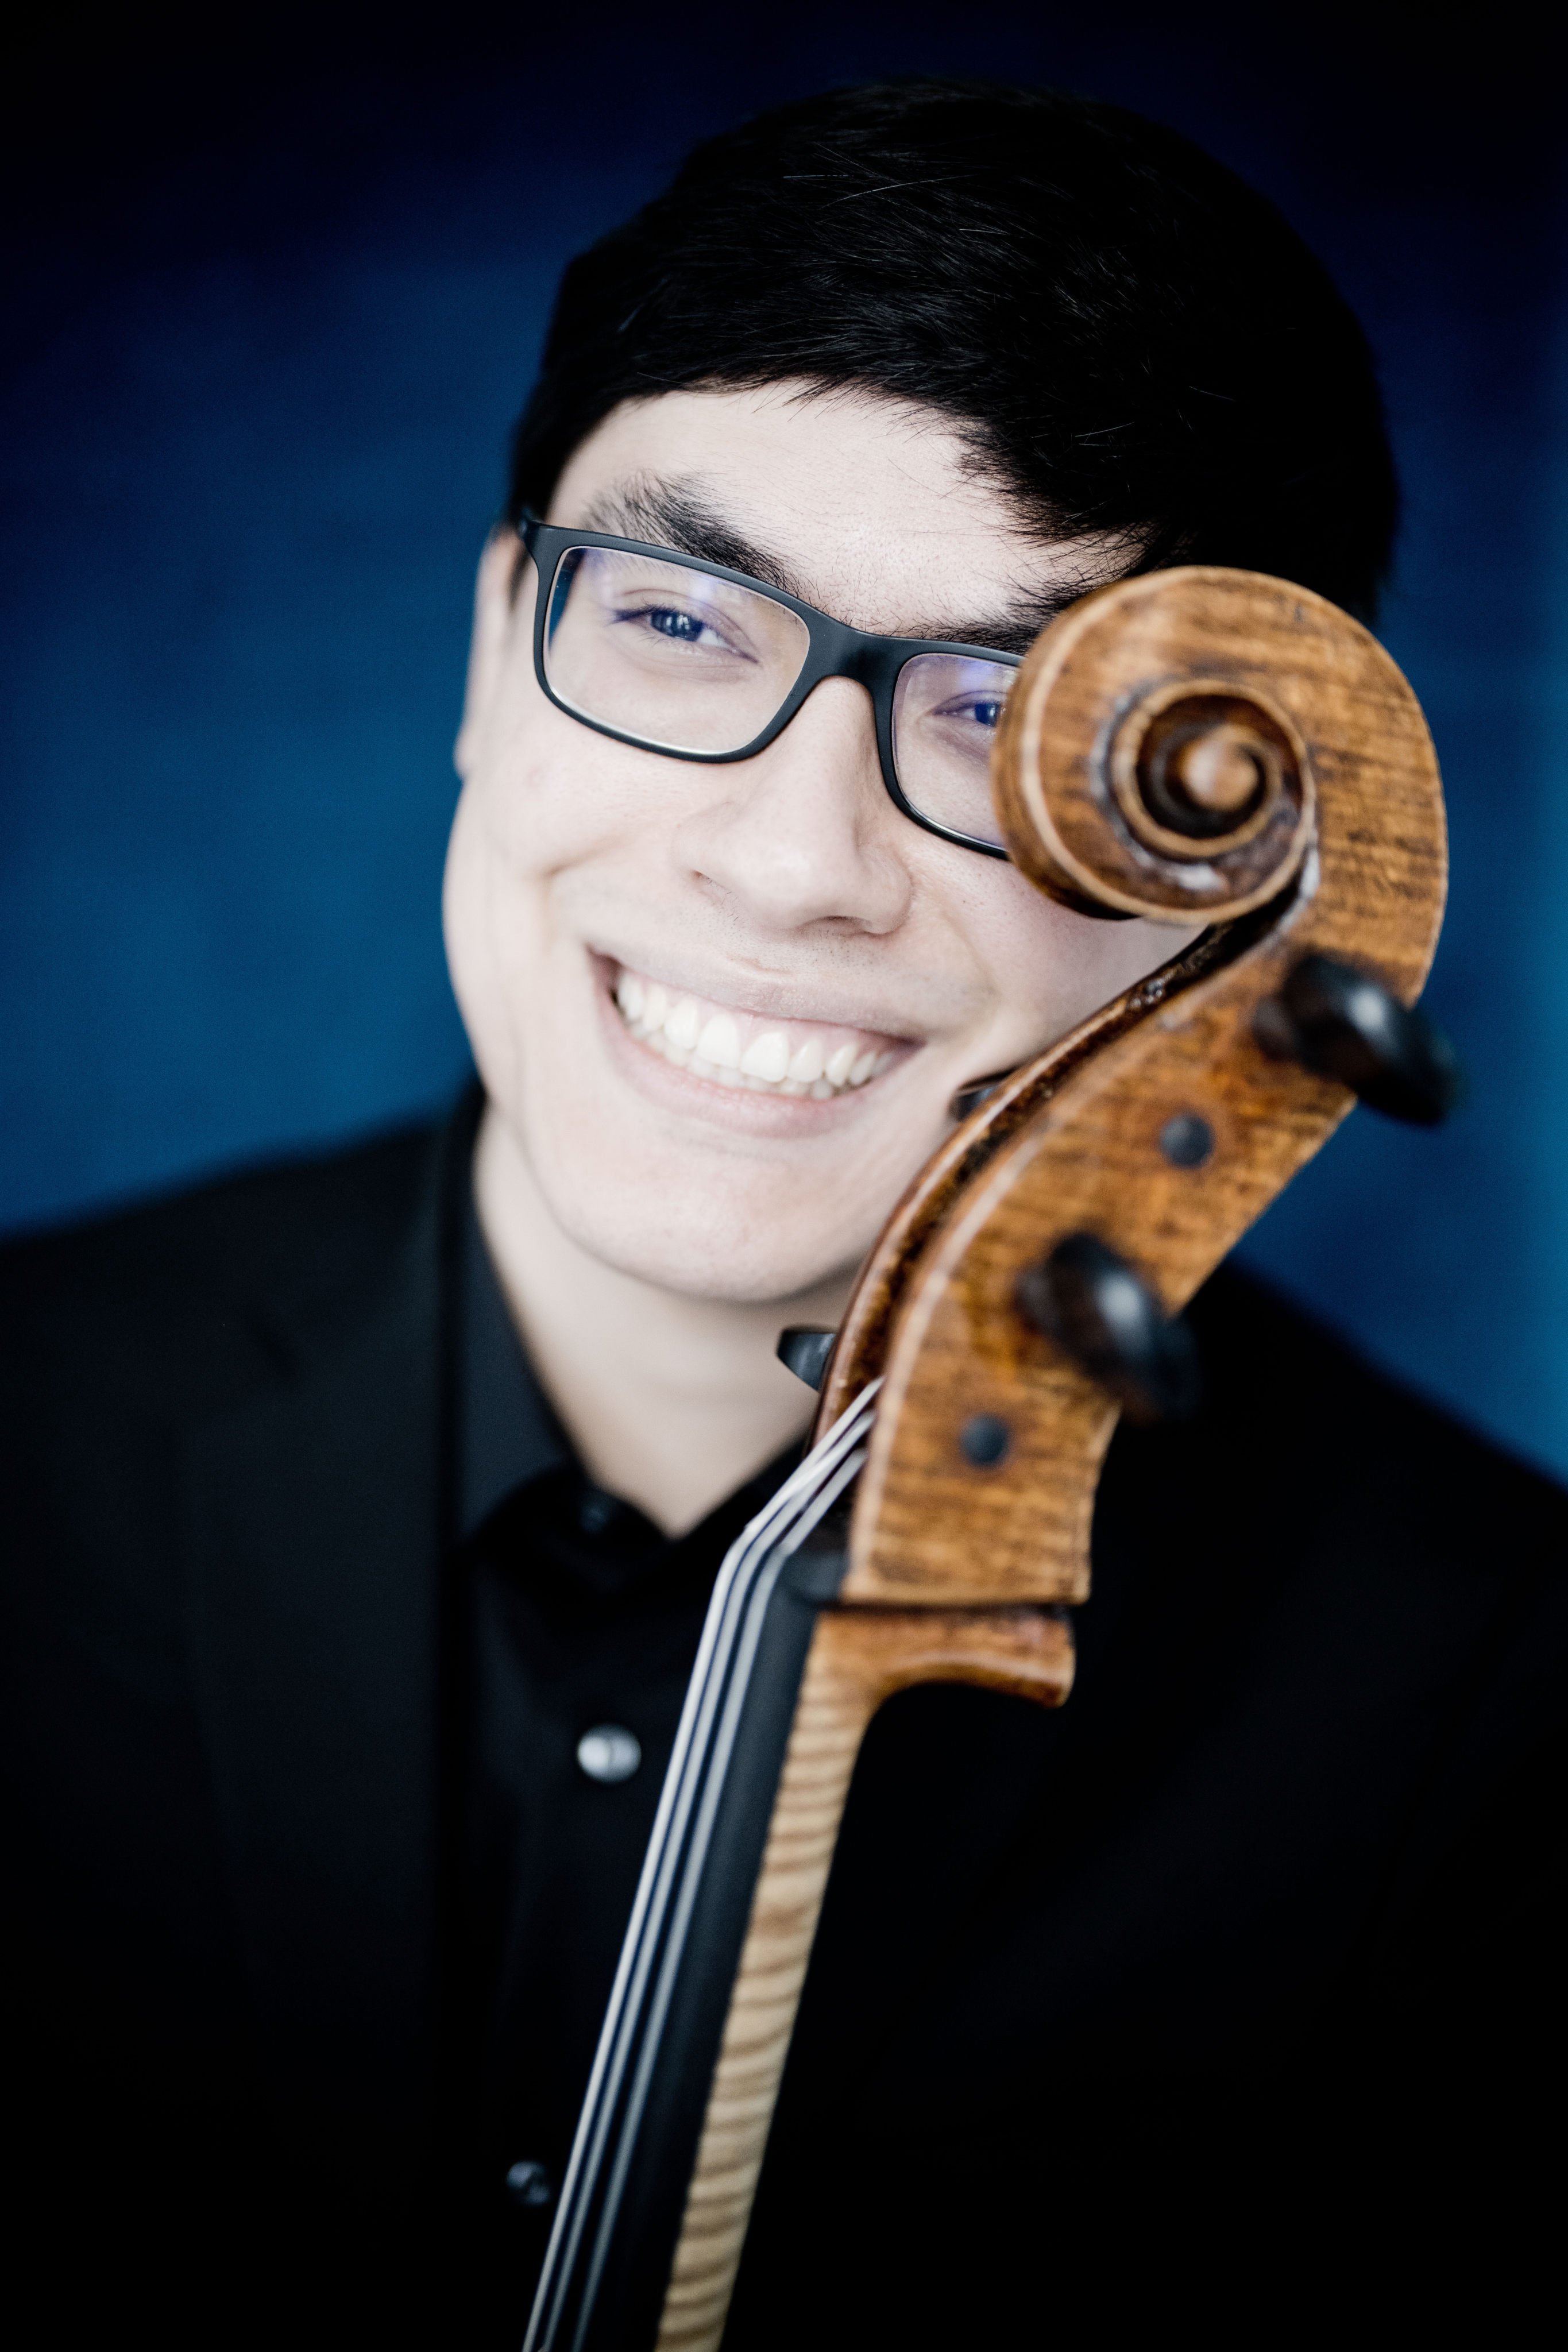 Cellist Zlatomir Fung, who studied at The Juilliard School in New York City, is making his debut in Hong Kong, his grandfather’s birthplace. He will be playing with local pianist Rachel Cheung. Photo: Premiere Performances